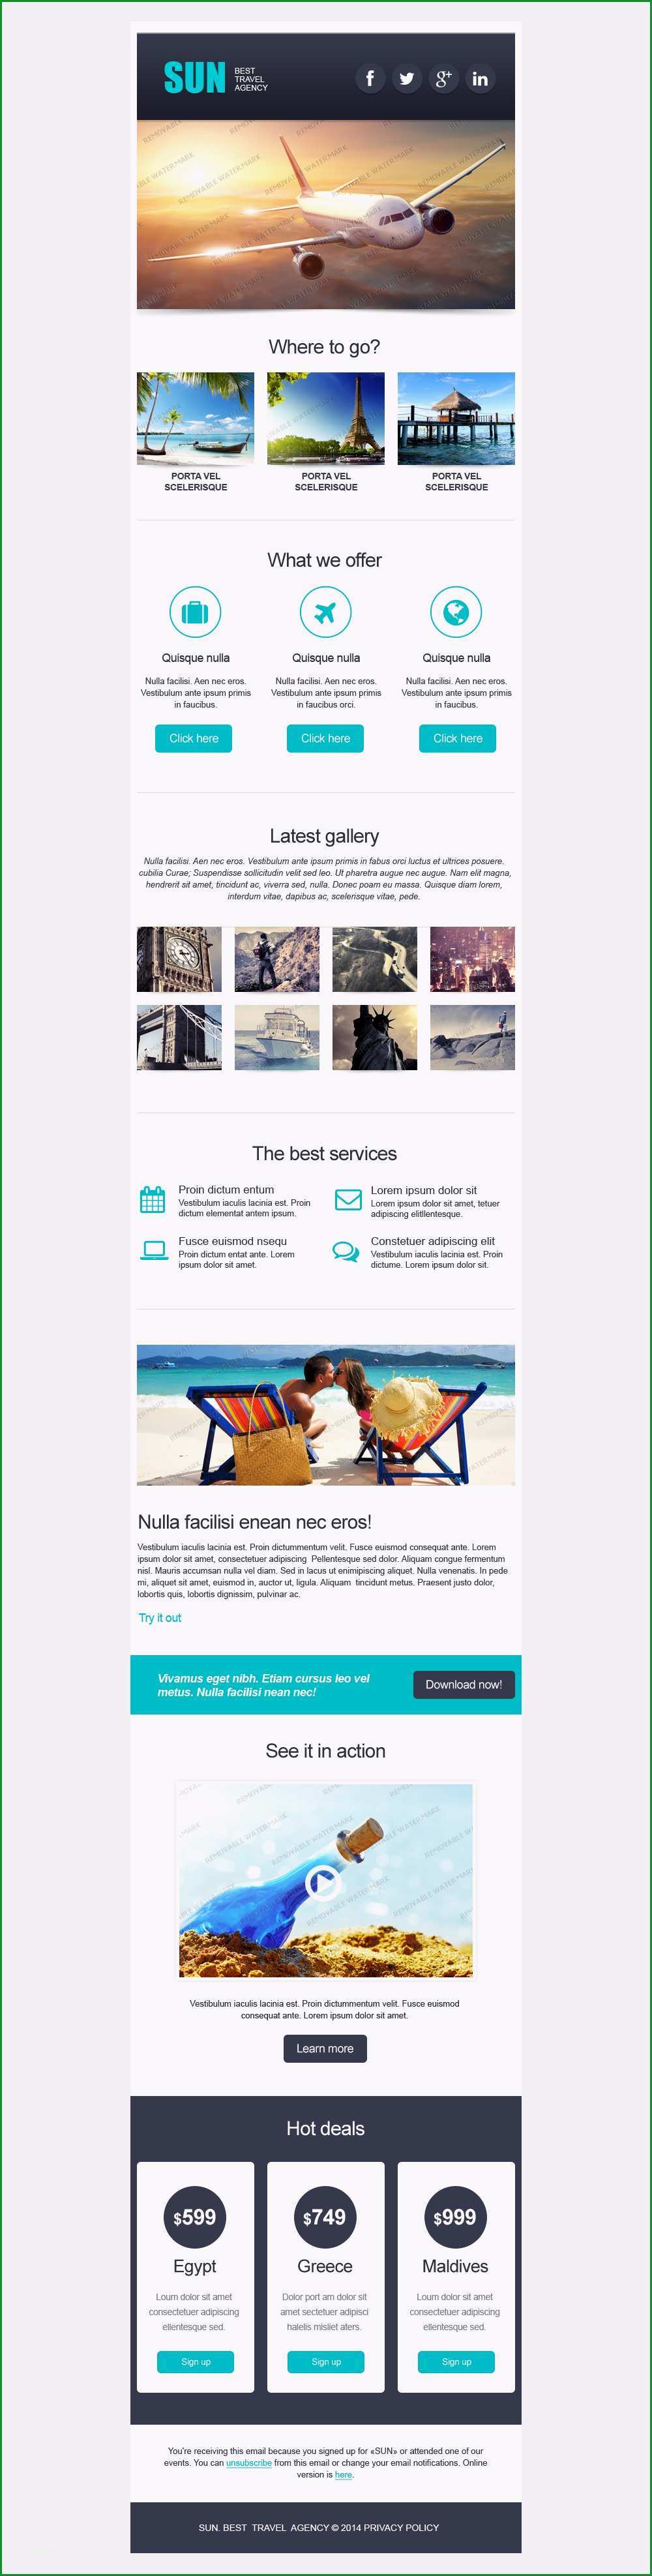 responsive email template